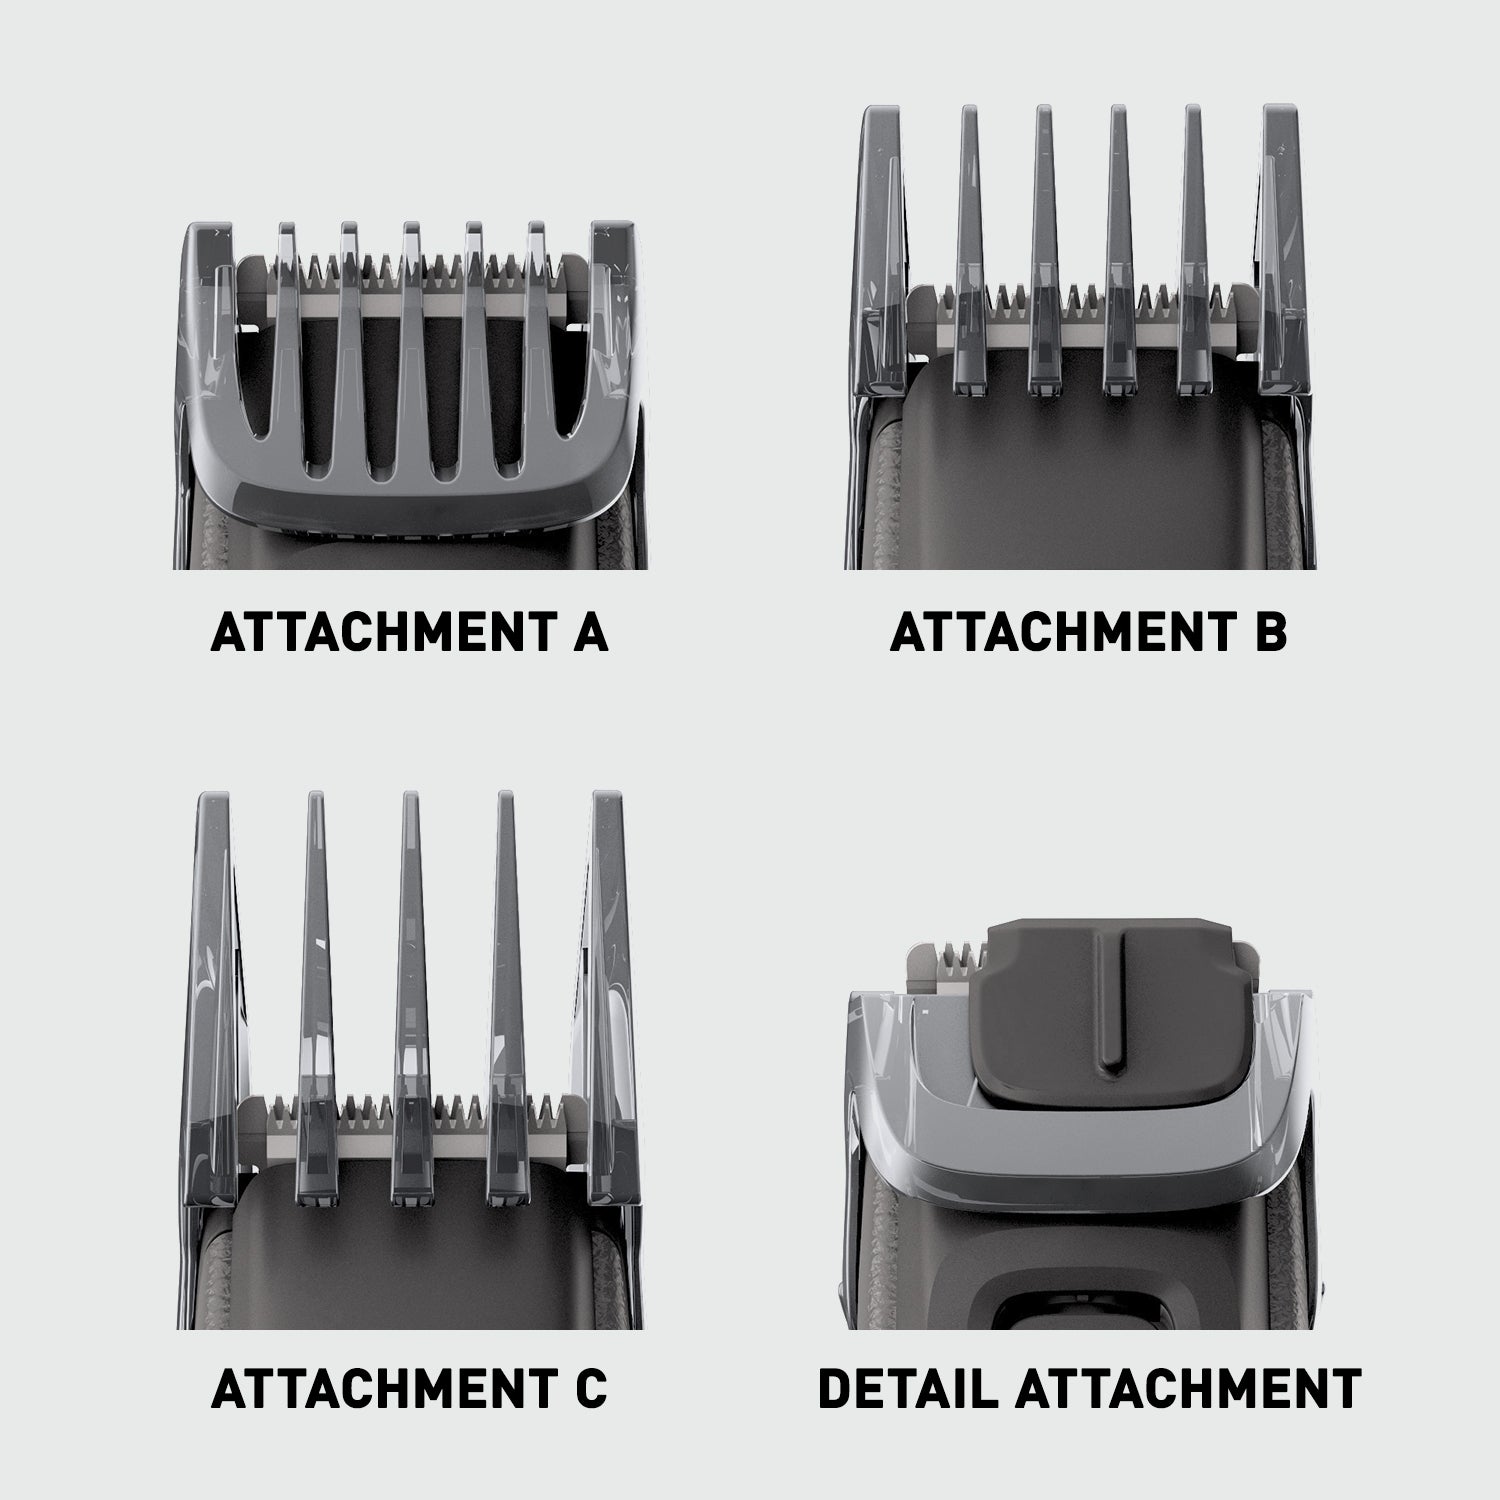 Adjustable with Hair Attachments Panasonic Settings Comb ER-GB96-K Trimmer and Long Beard 58 4 - Length